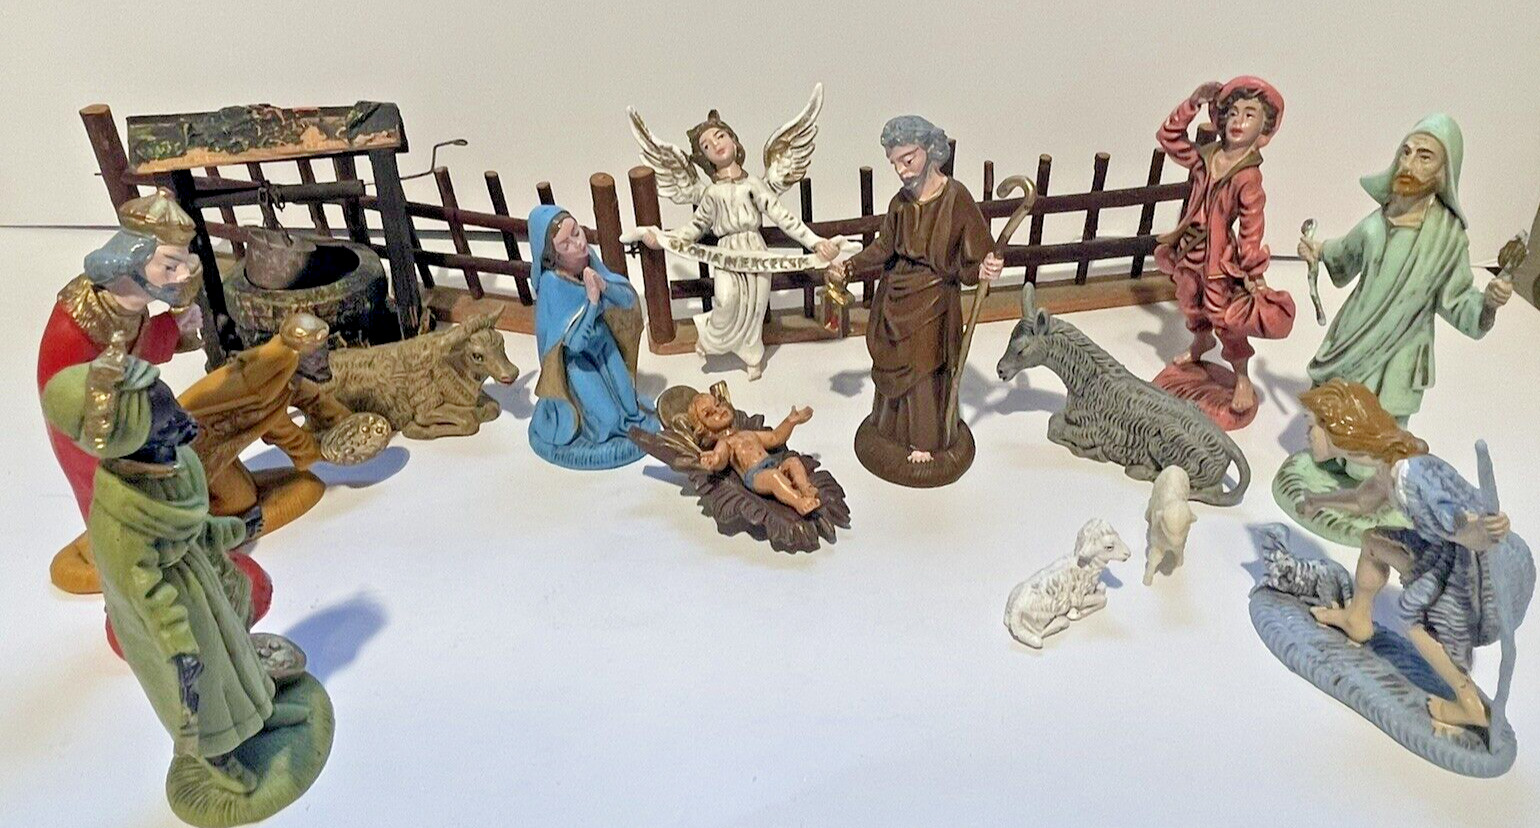 Vintage Presepio Nativity Set Made in Italy - 15 Figurines - Fence - Well